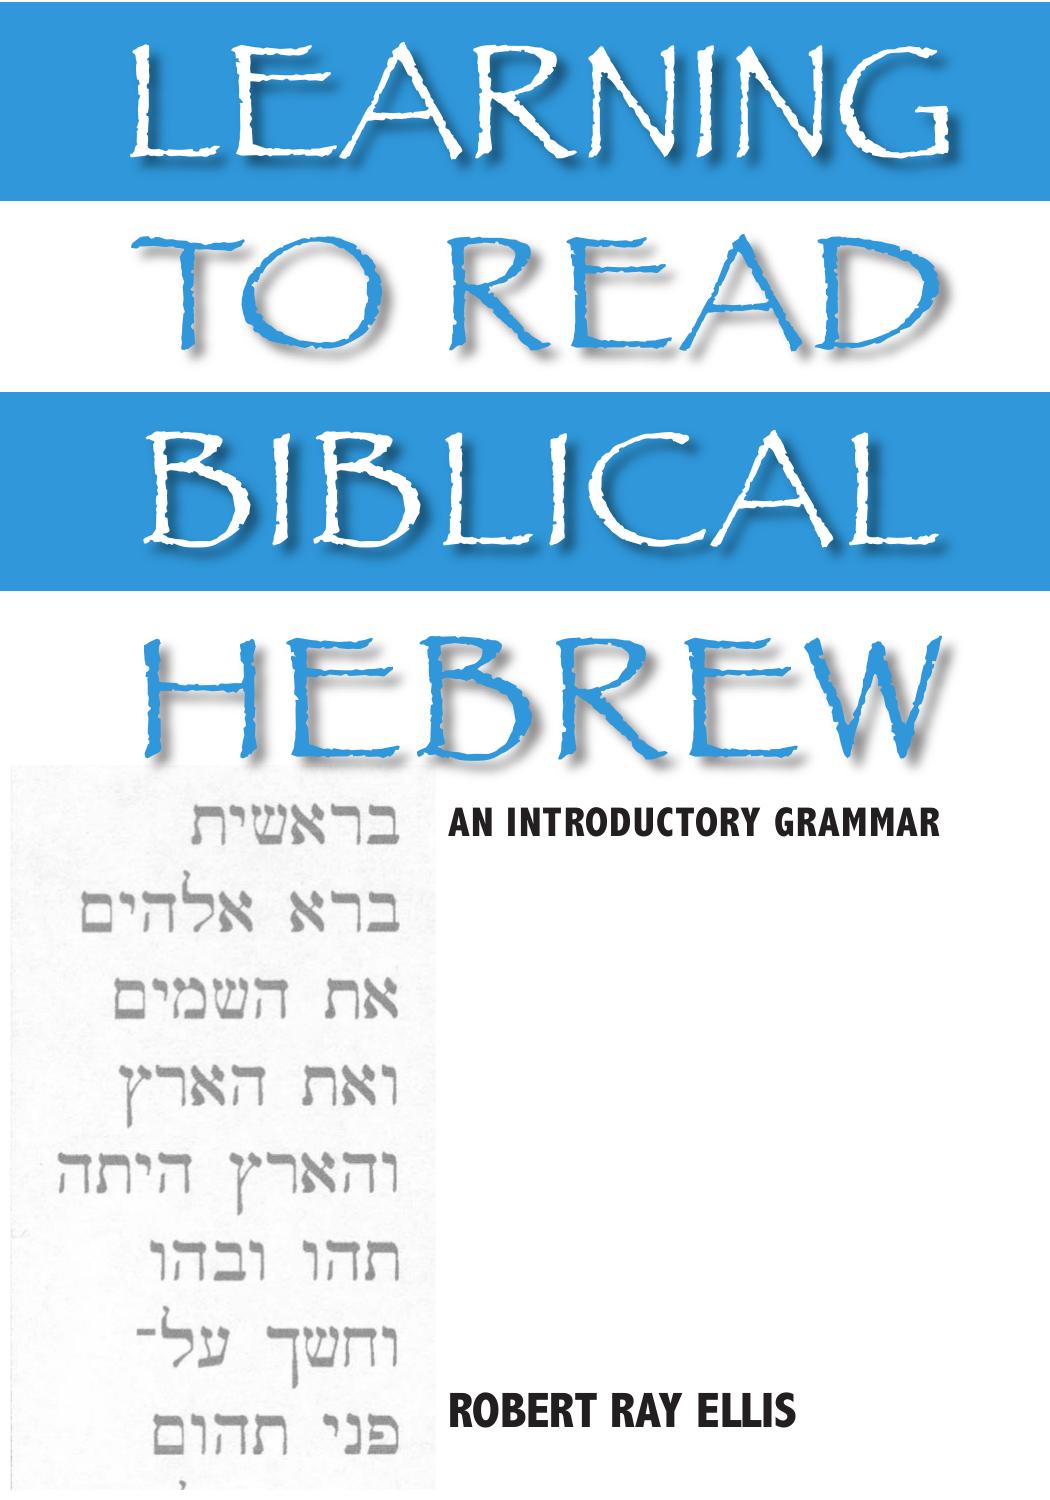 TO READ LEARNING BIBLICAL HEBREW